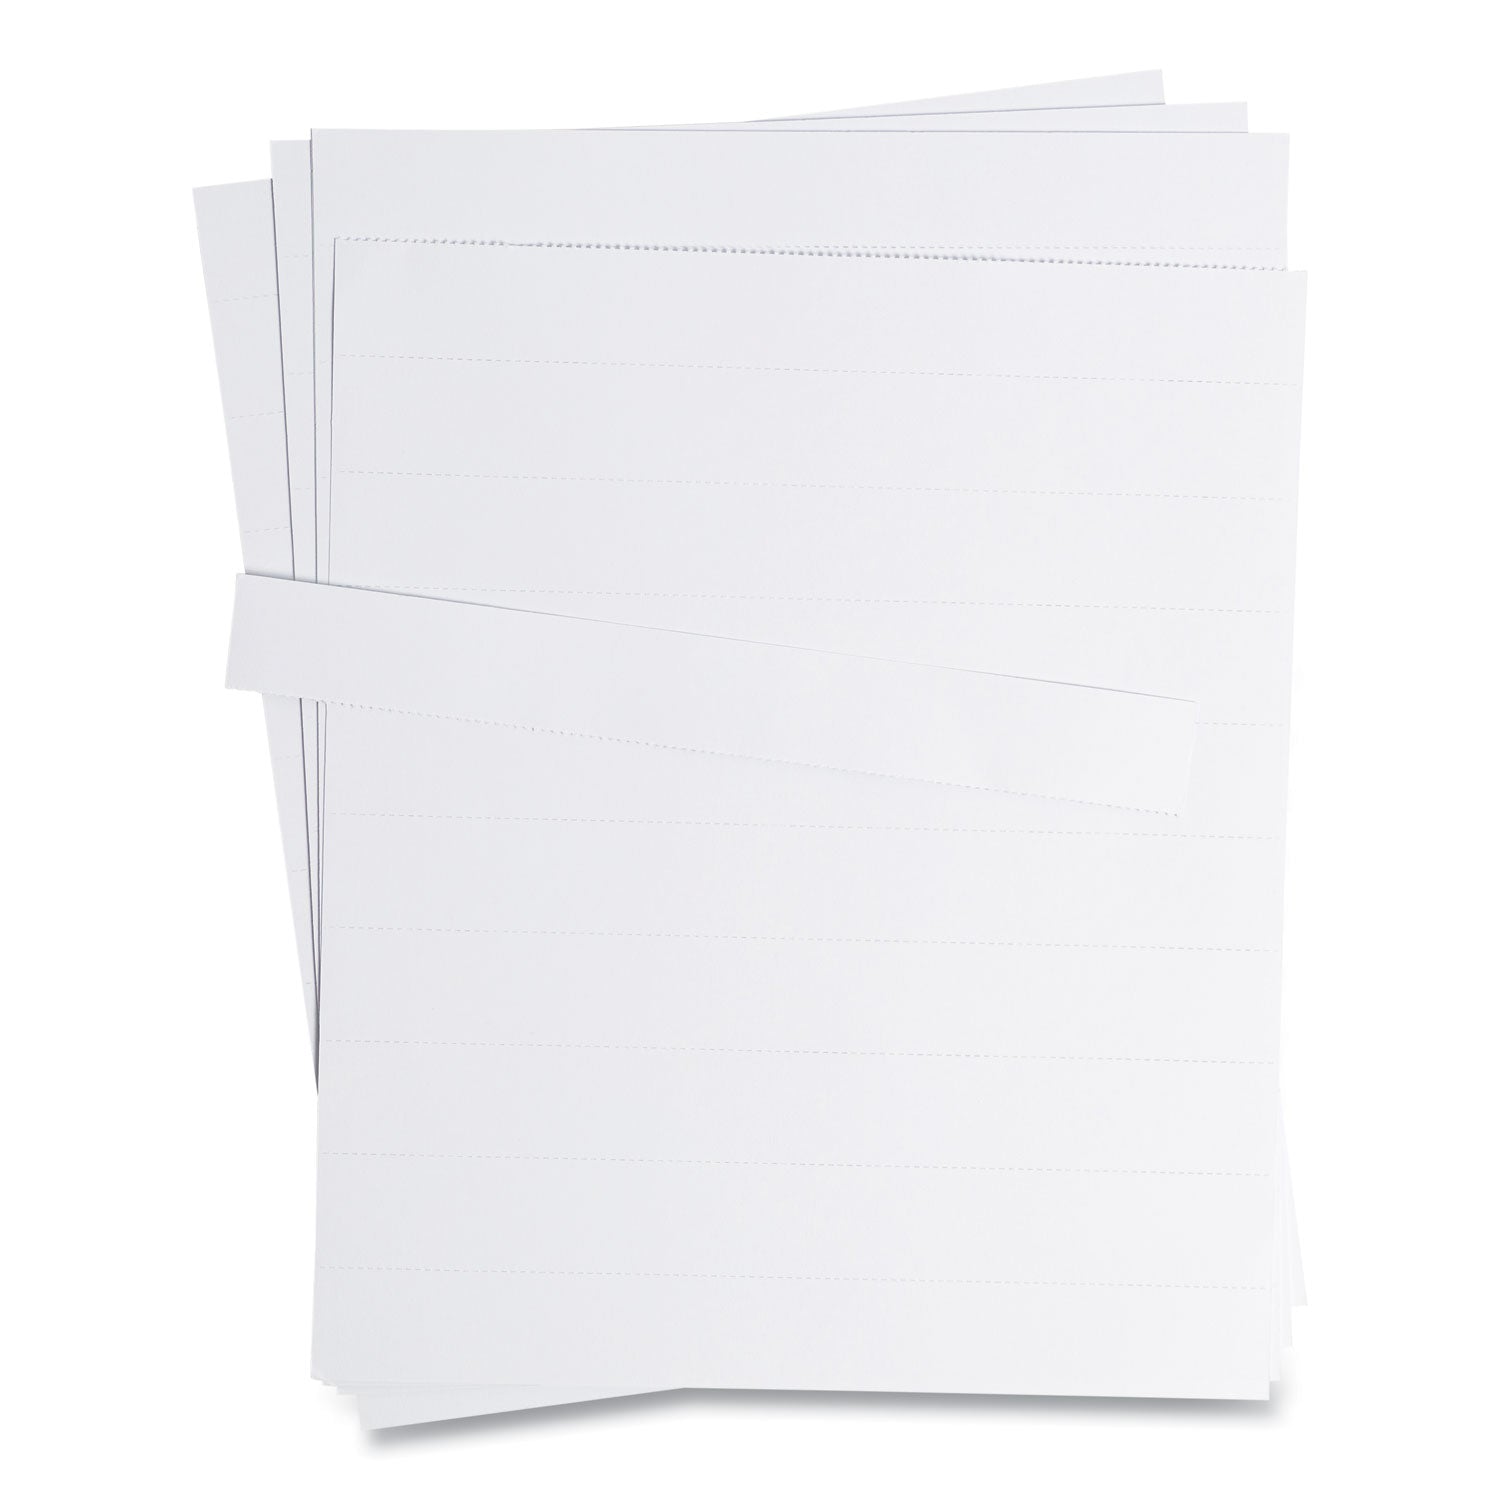 data-card-replacement-sheet-85-x-11-sheets-perforated-at-1-white-10-pack_ubrfm1615 - 5